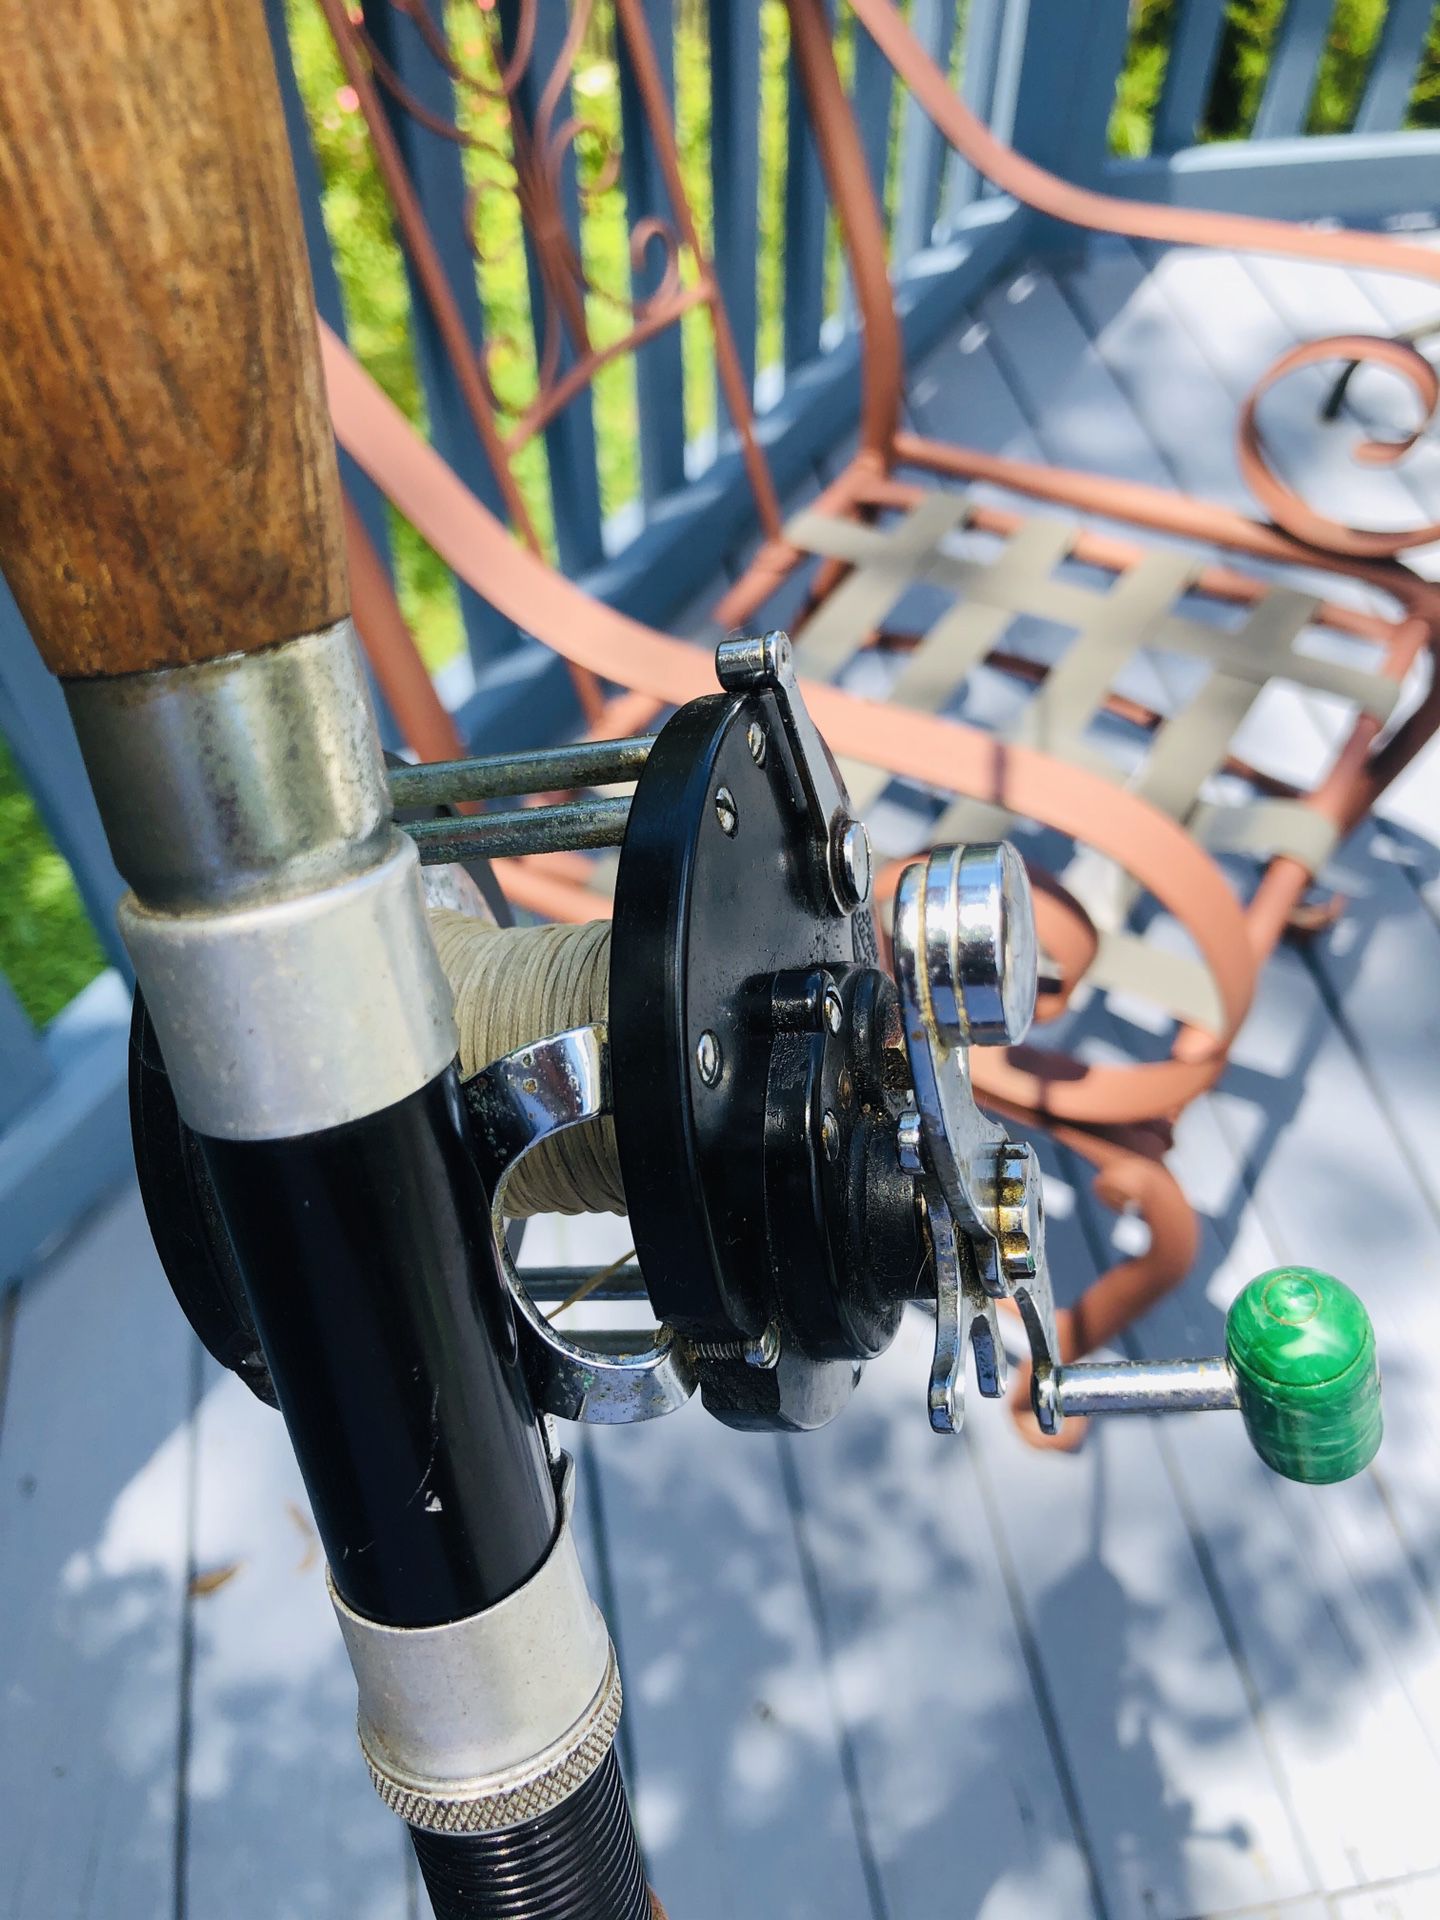 fishing reel and rod for deep sea